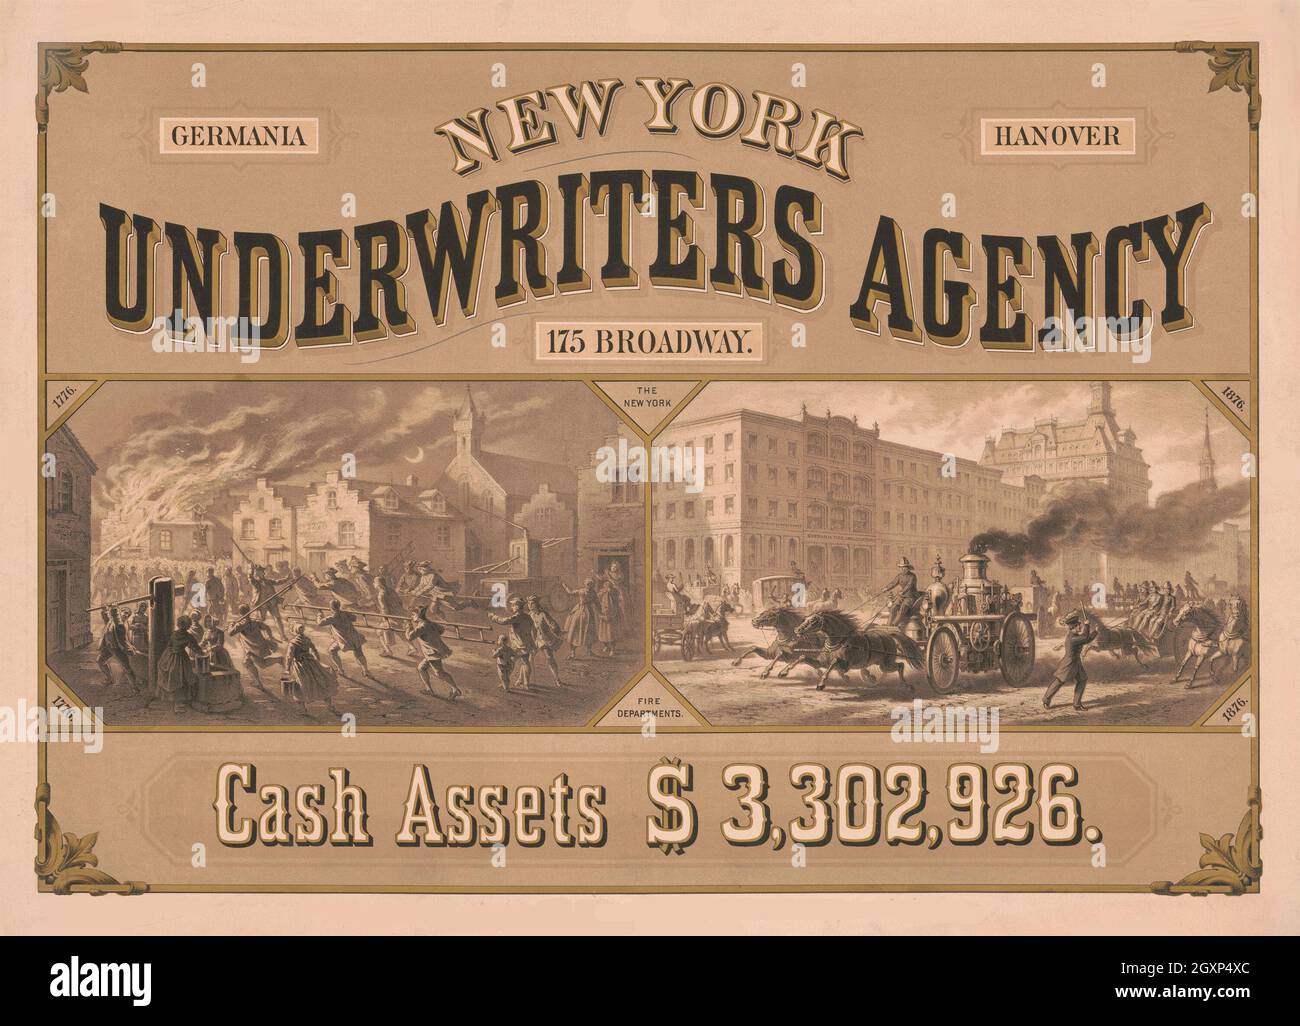 New York Underwriters Agency Banque D'Images